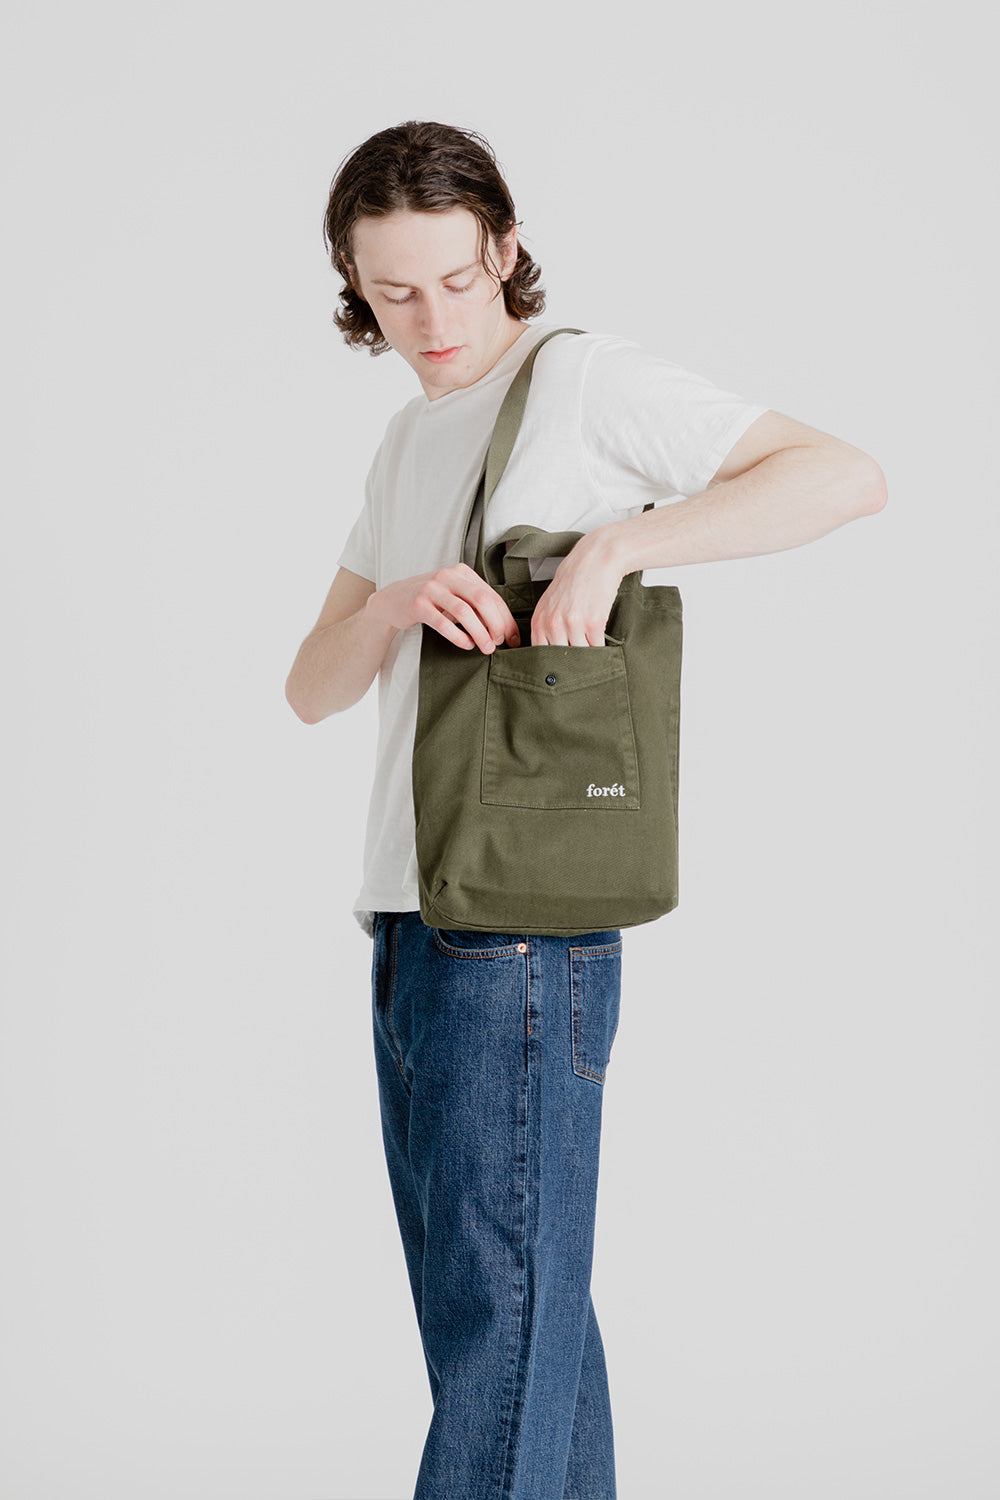 foret-turf-twill-tote-bag-army